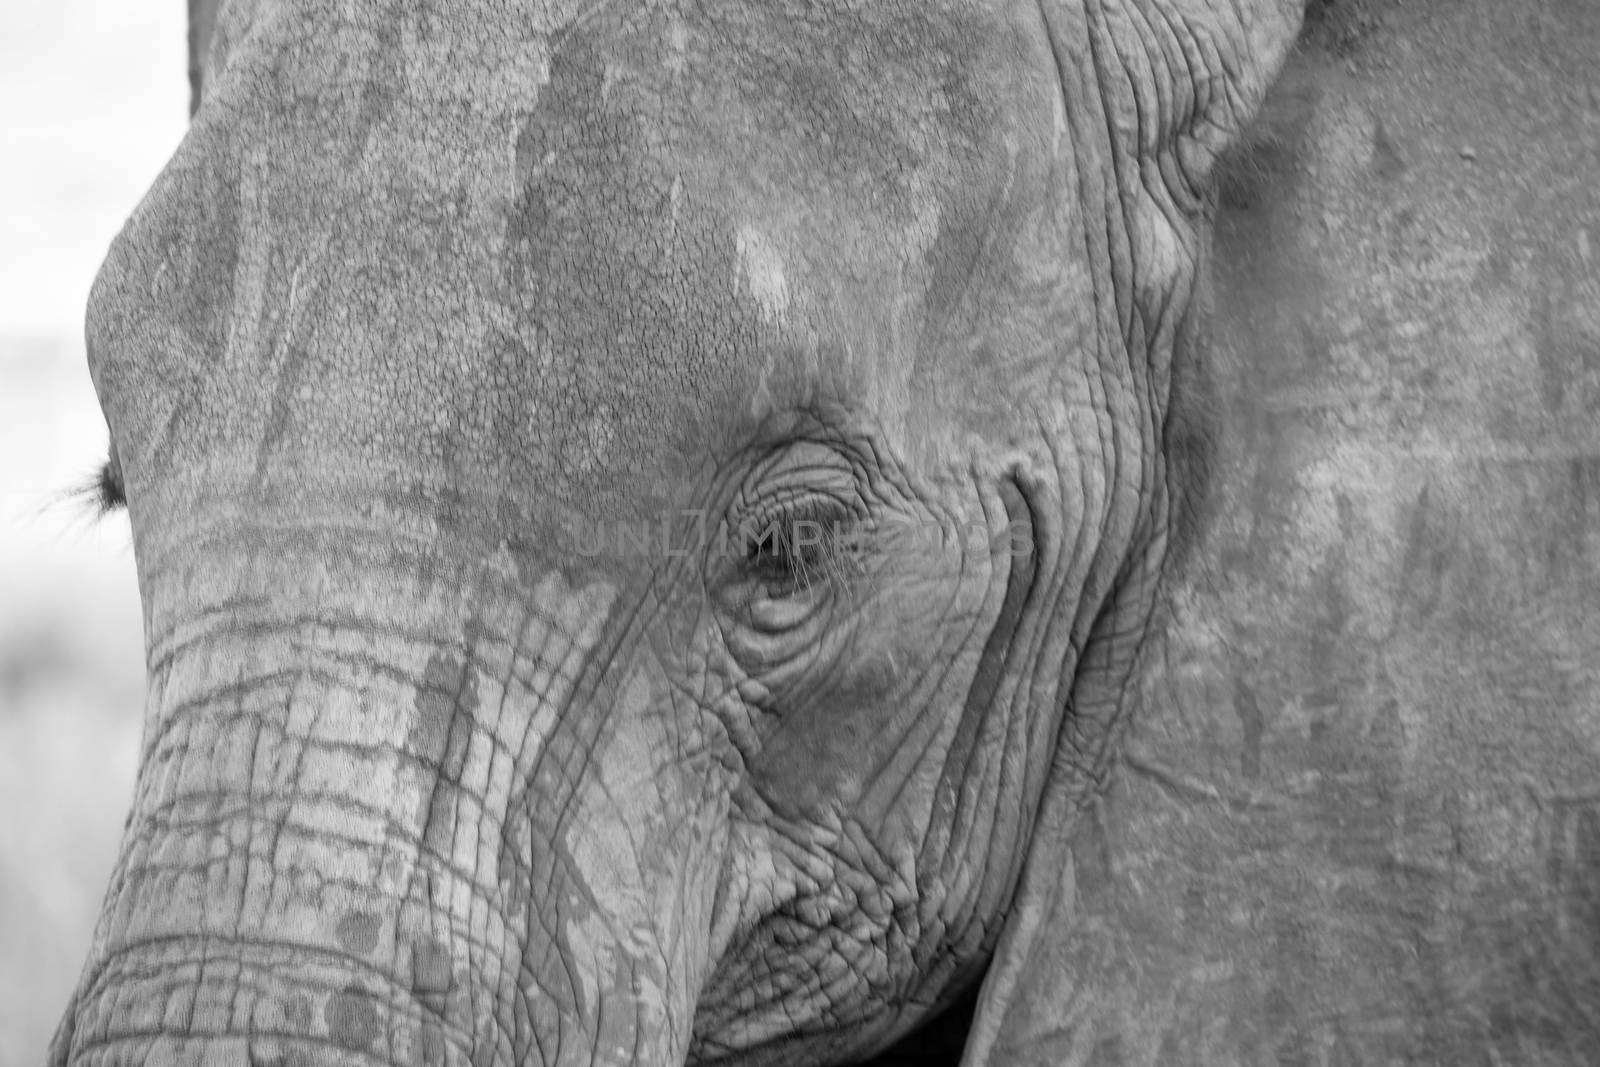 A face of a red elephant taken up close